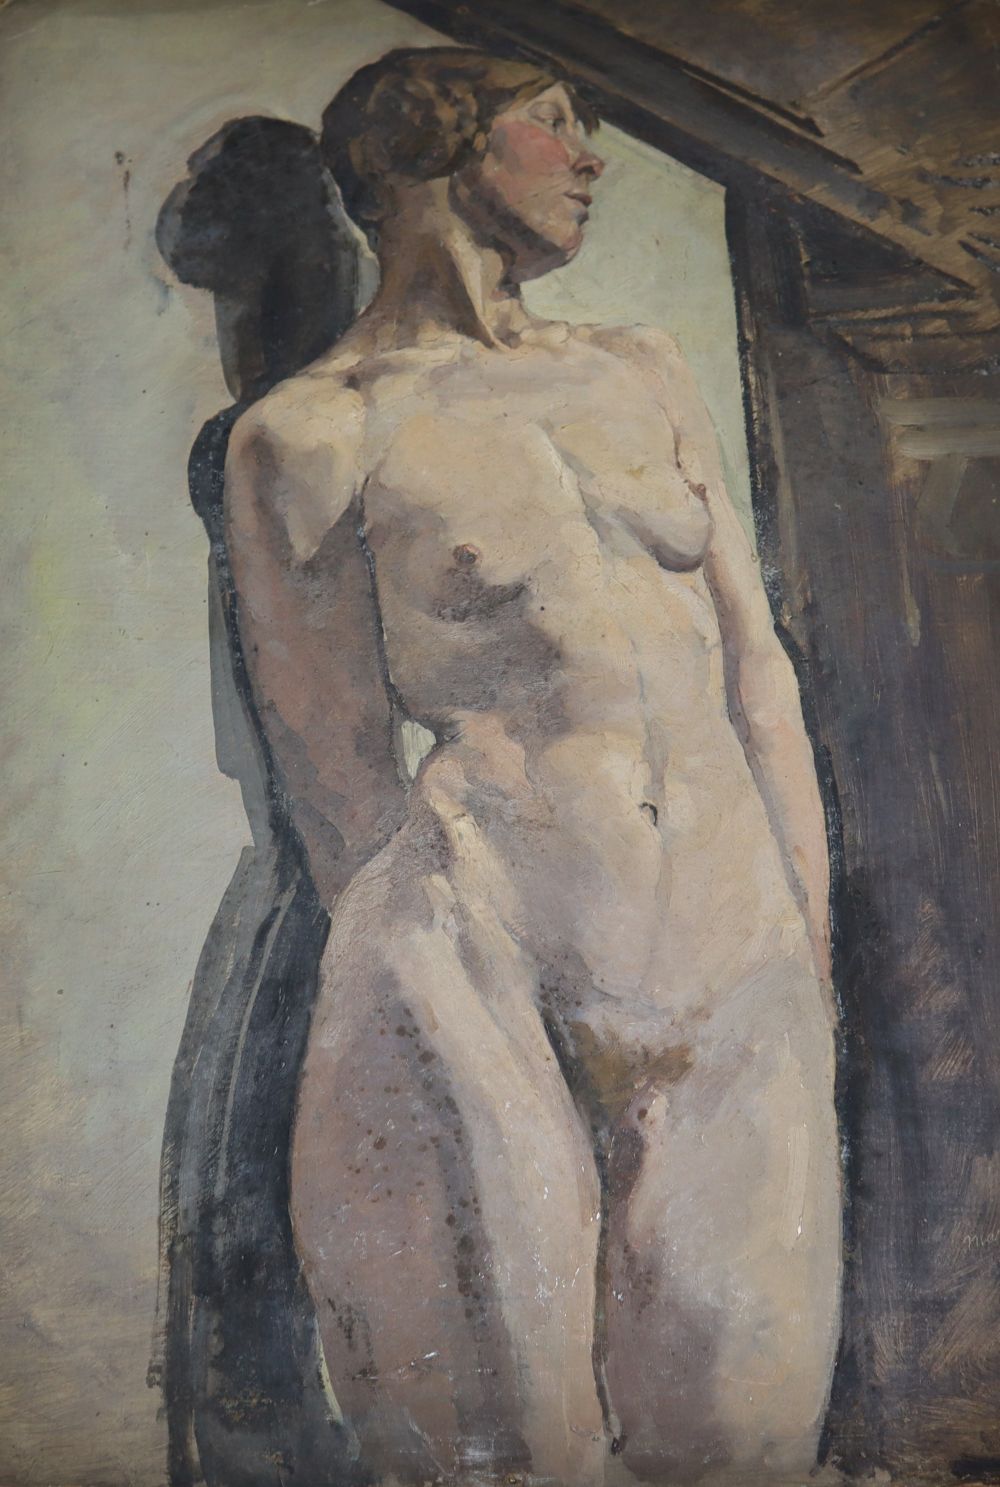 Kemp (fl. C. 1913-14), a folio of students artworks, mostly charcoal nude studies including one oil on card, largest approx. 62 x 47cm